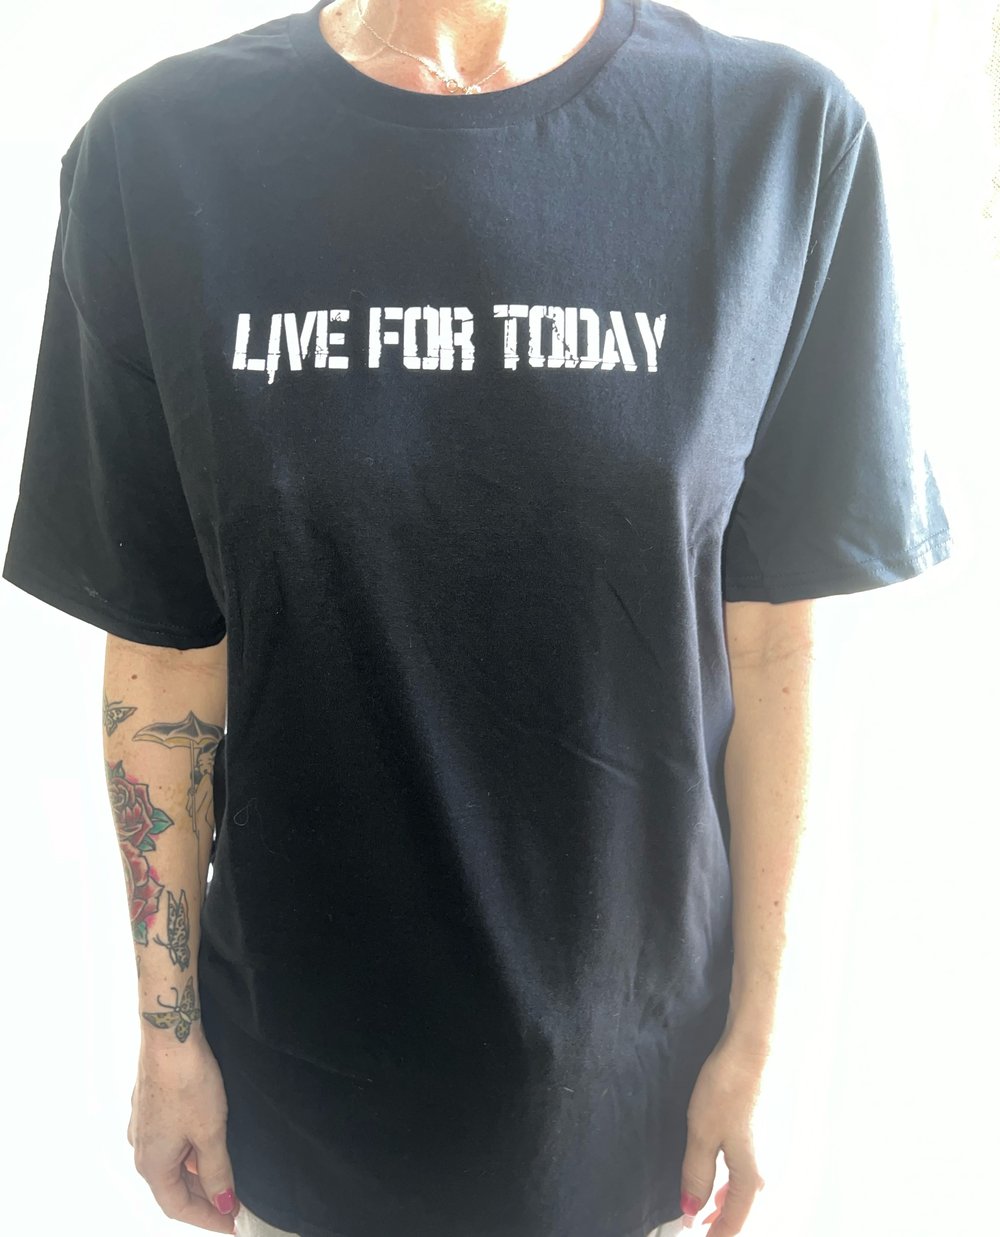 Live For Today Tshirt